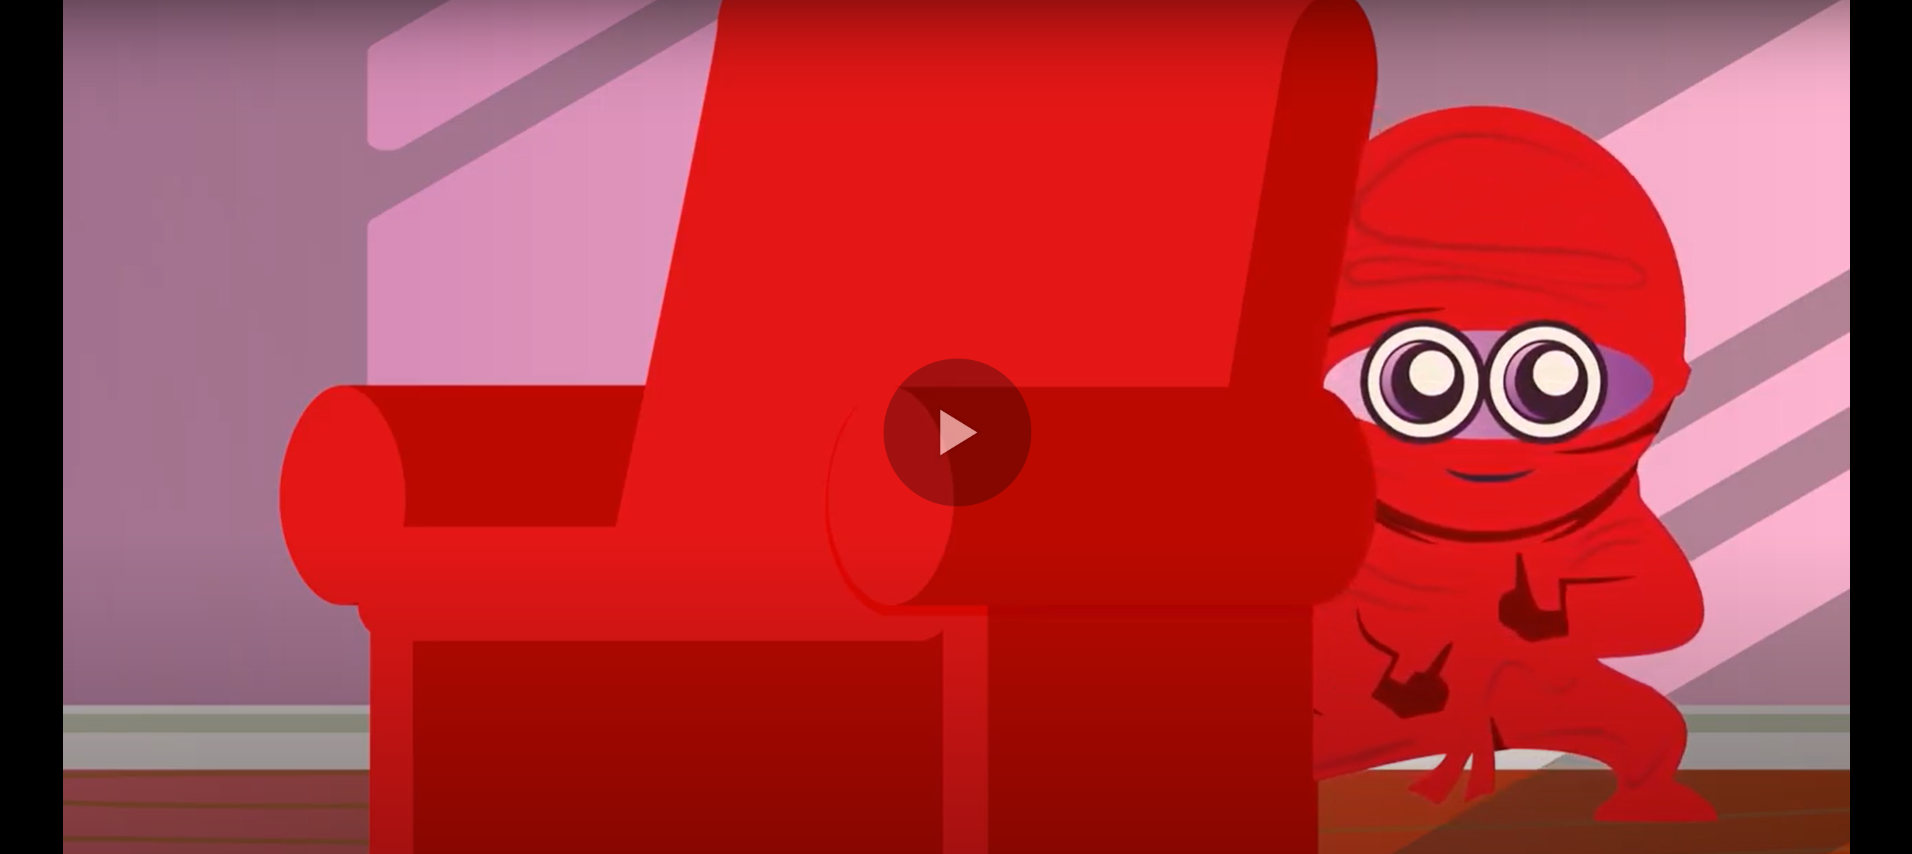 Image description: A screenshot from an animated video. A cartoony child dressed in a red ninja costume is hiding behind a red recliner. A small play icon is in the middle of the image.